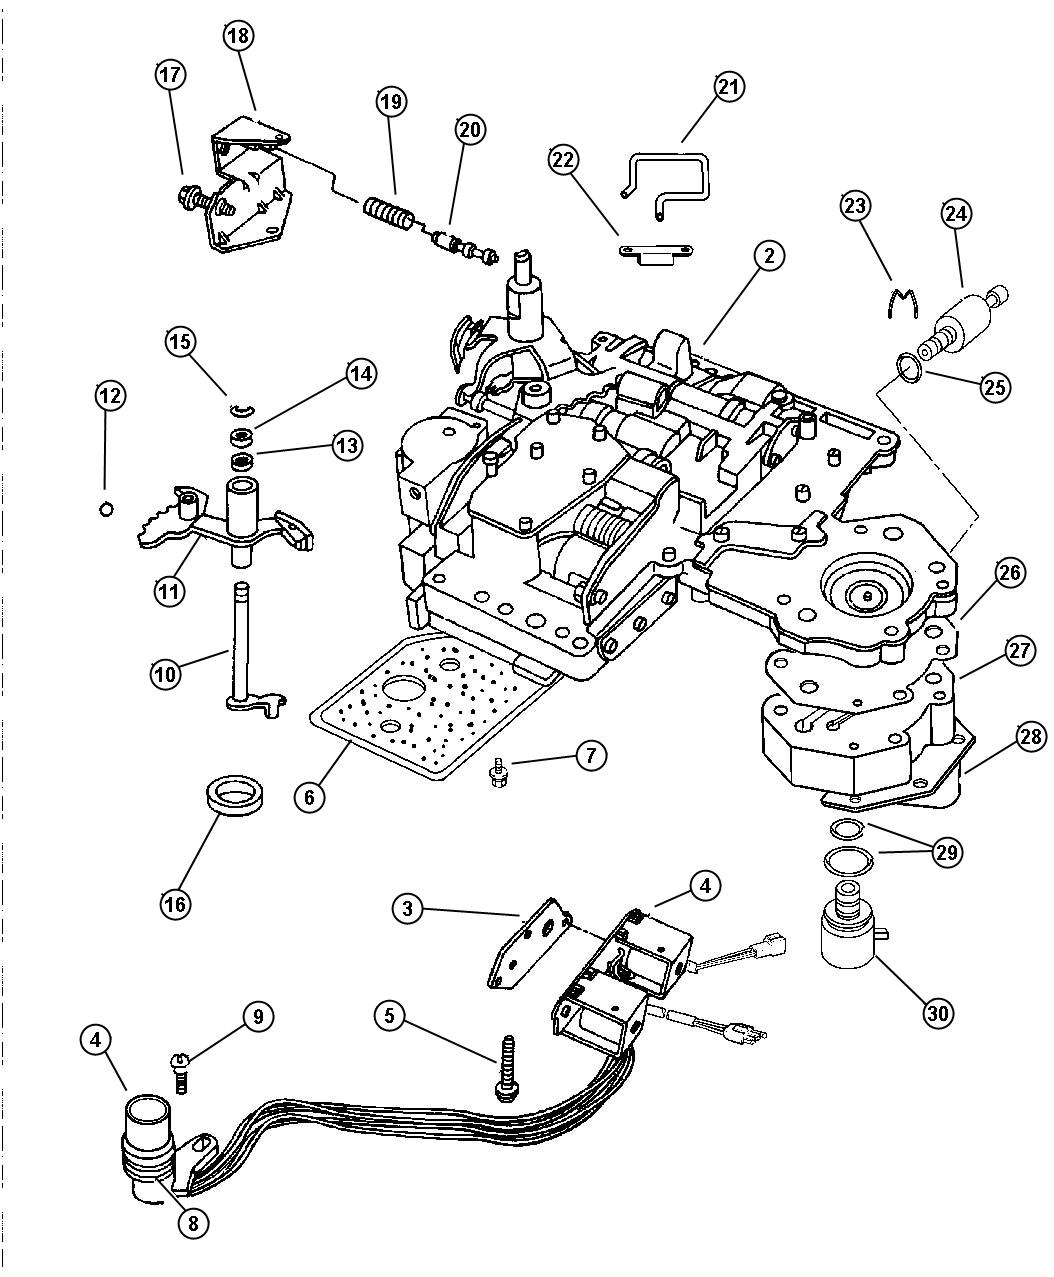 Valve Body Automatic Transmission, 4 Speed, 42Re. Diagram